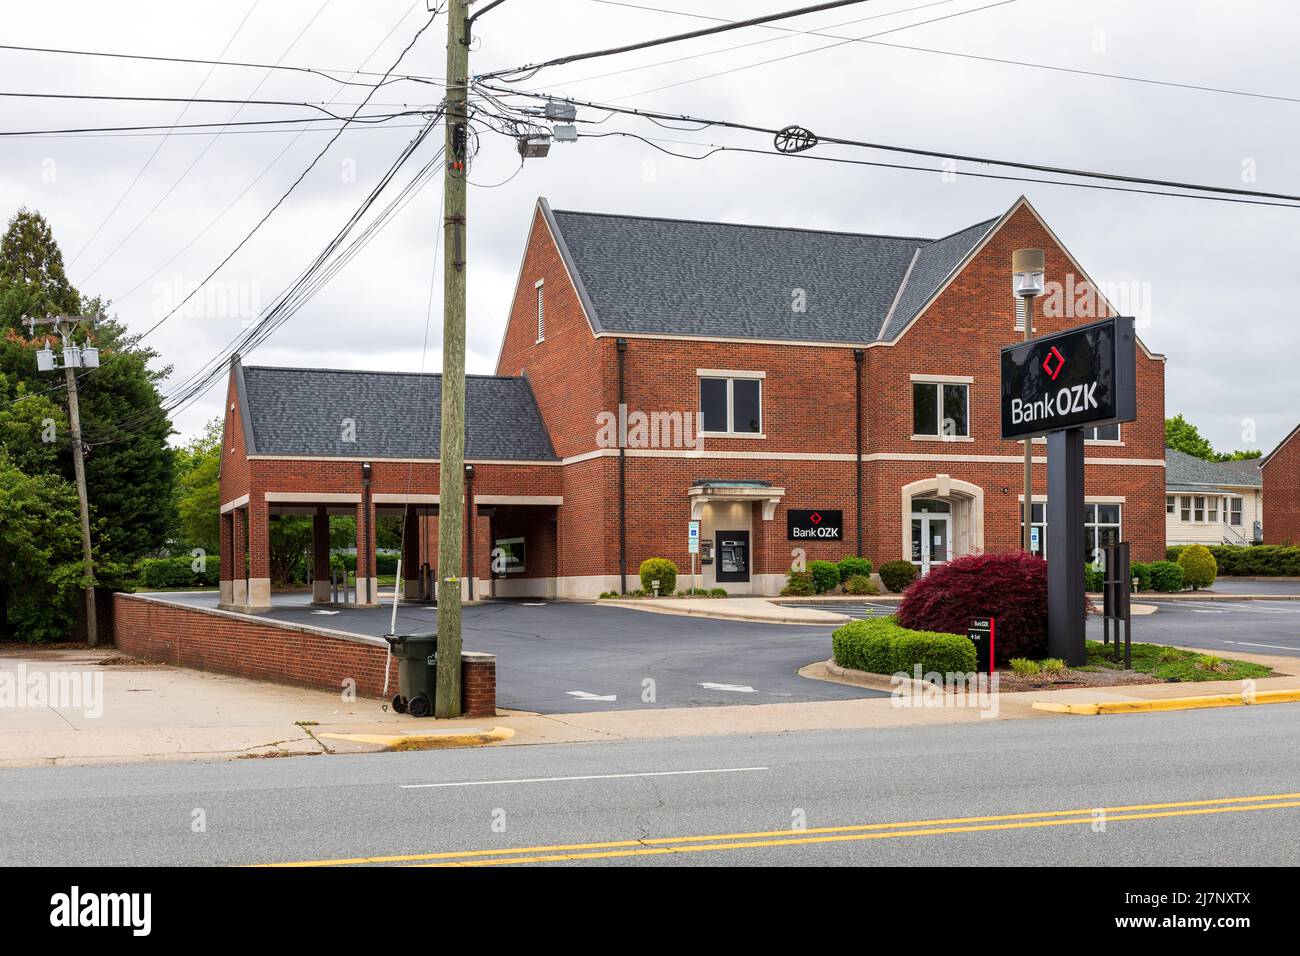 LEXINGTON, NC, USA-8 MAY 2022: Bank OZK building, showing signs, ATM and drive thru. Stock Photo